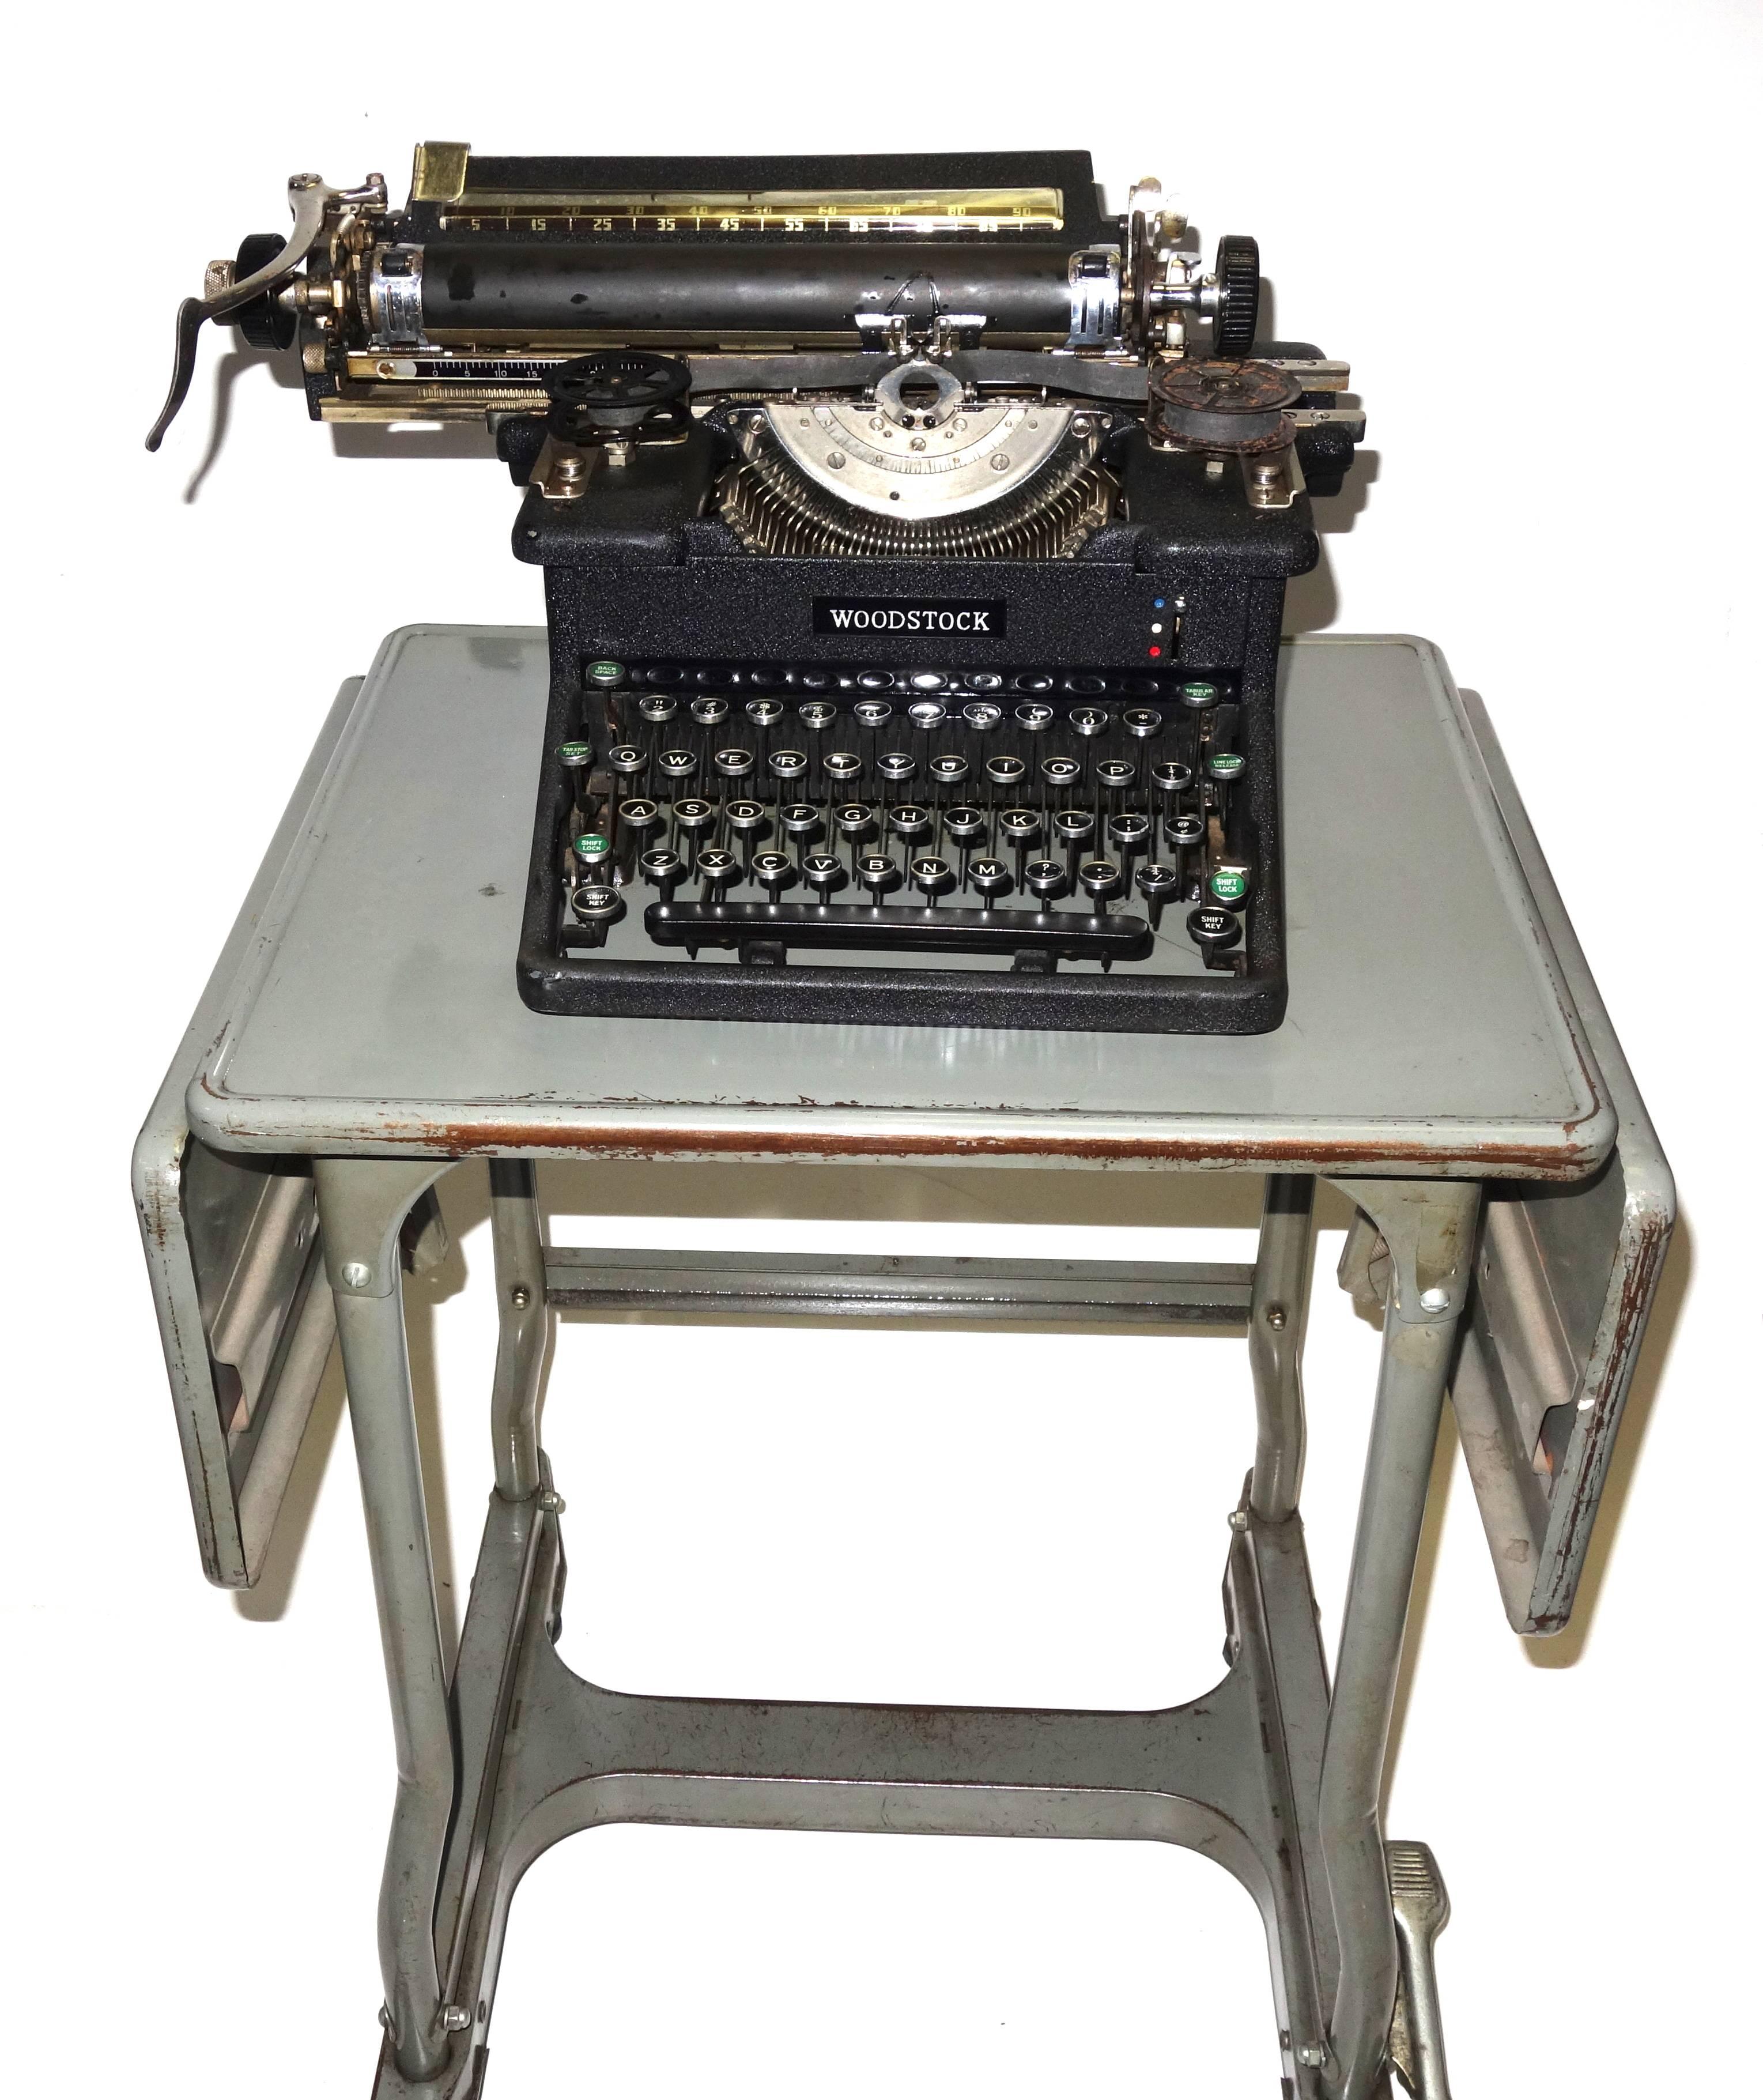 Offered for your consideration is this iconic, working, circa 1920s Woodstock vintage typewriter displayed on a vintage steel typewriter drop leaf rolling table.
Woodstock was based near Chicago and started out as the Emerson Brand, then the Roebuck